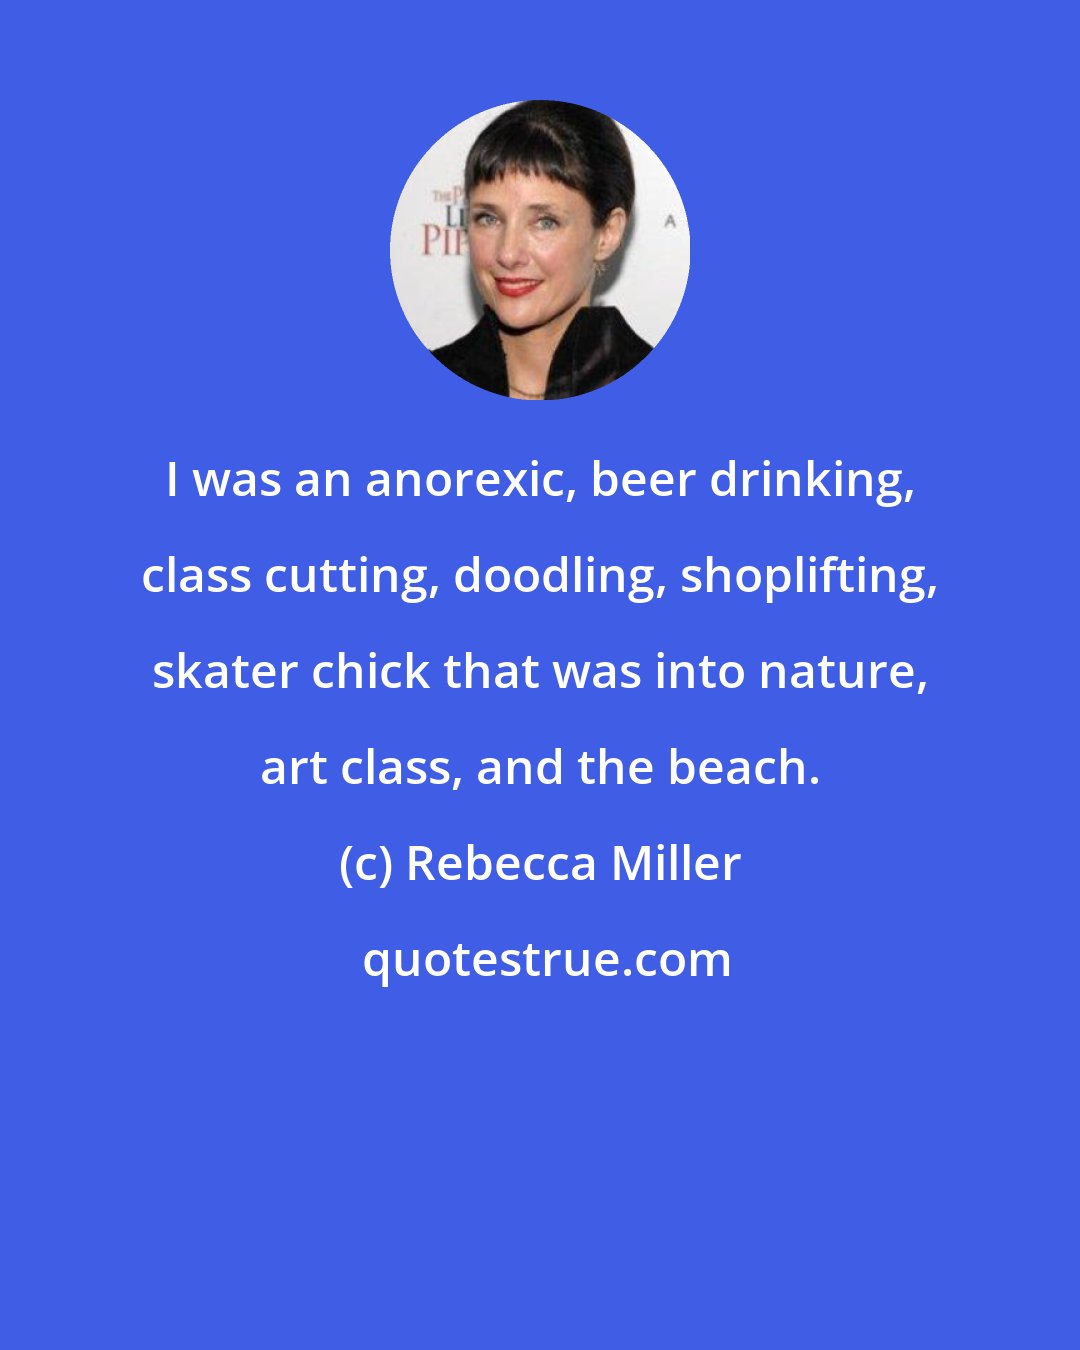 Rebecca Miller: I was an anorexic, beer drinking, class cutting, doodling, shoplifting, skater chick that was into nature, art class, and the beach.